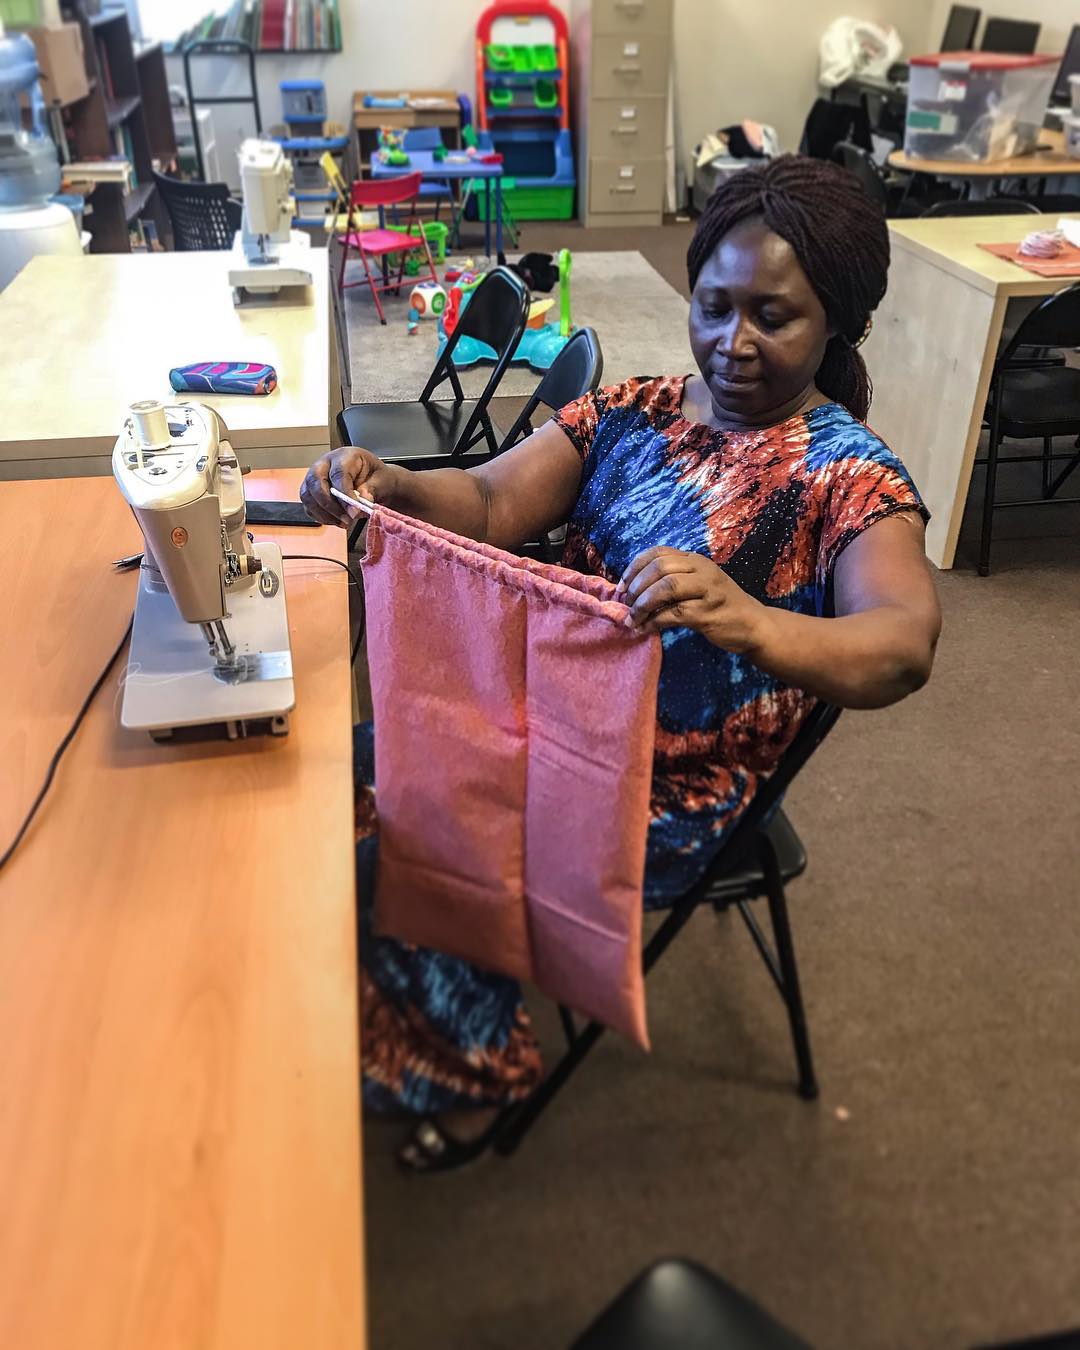 Woman Sewing a Drawstring Bag on a Sewing Machine. Photo by Instagram user @uscridc